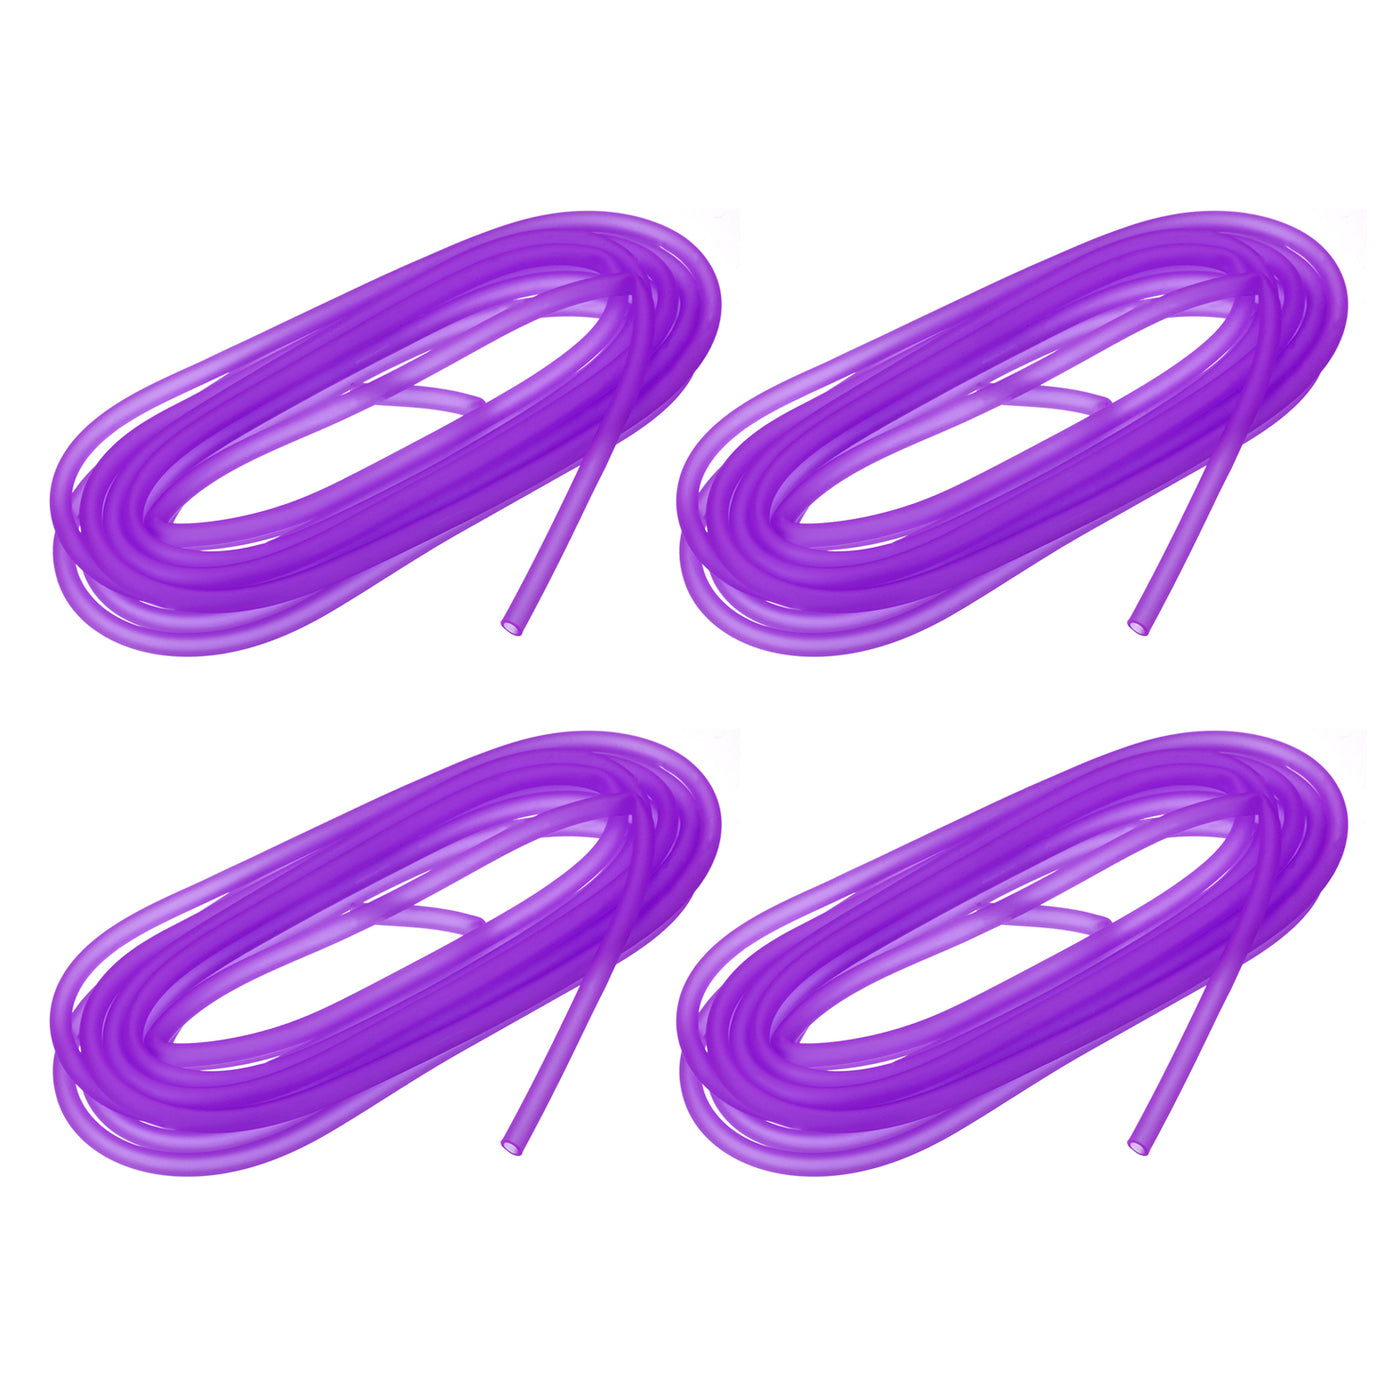 uxcell Uxcell Silicone Tubing 5/32" ID, 15/64" OD 4Pcs 13.12 Ft for Pump Transfer, Purple